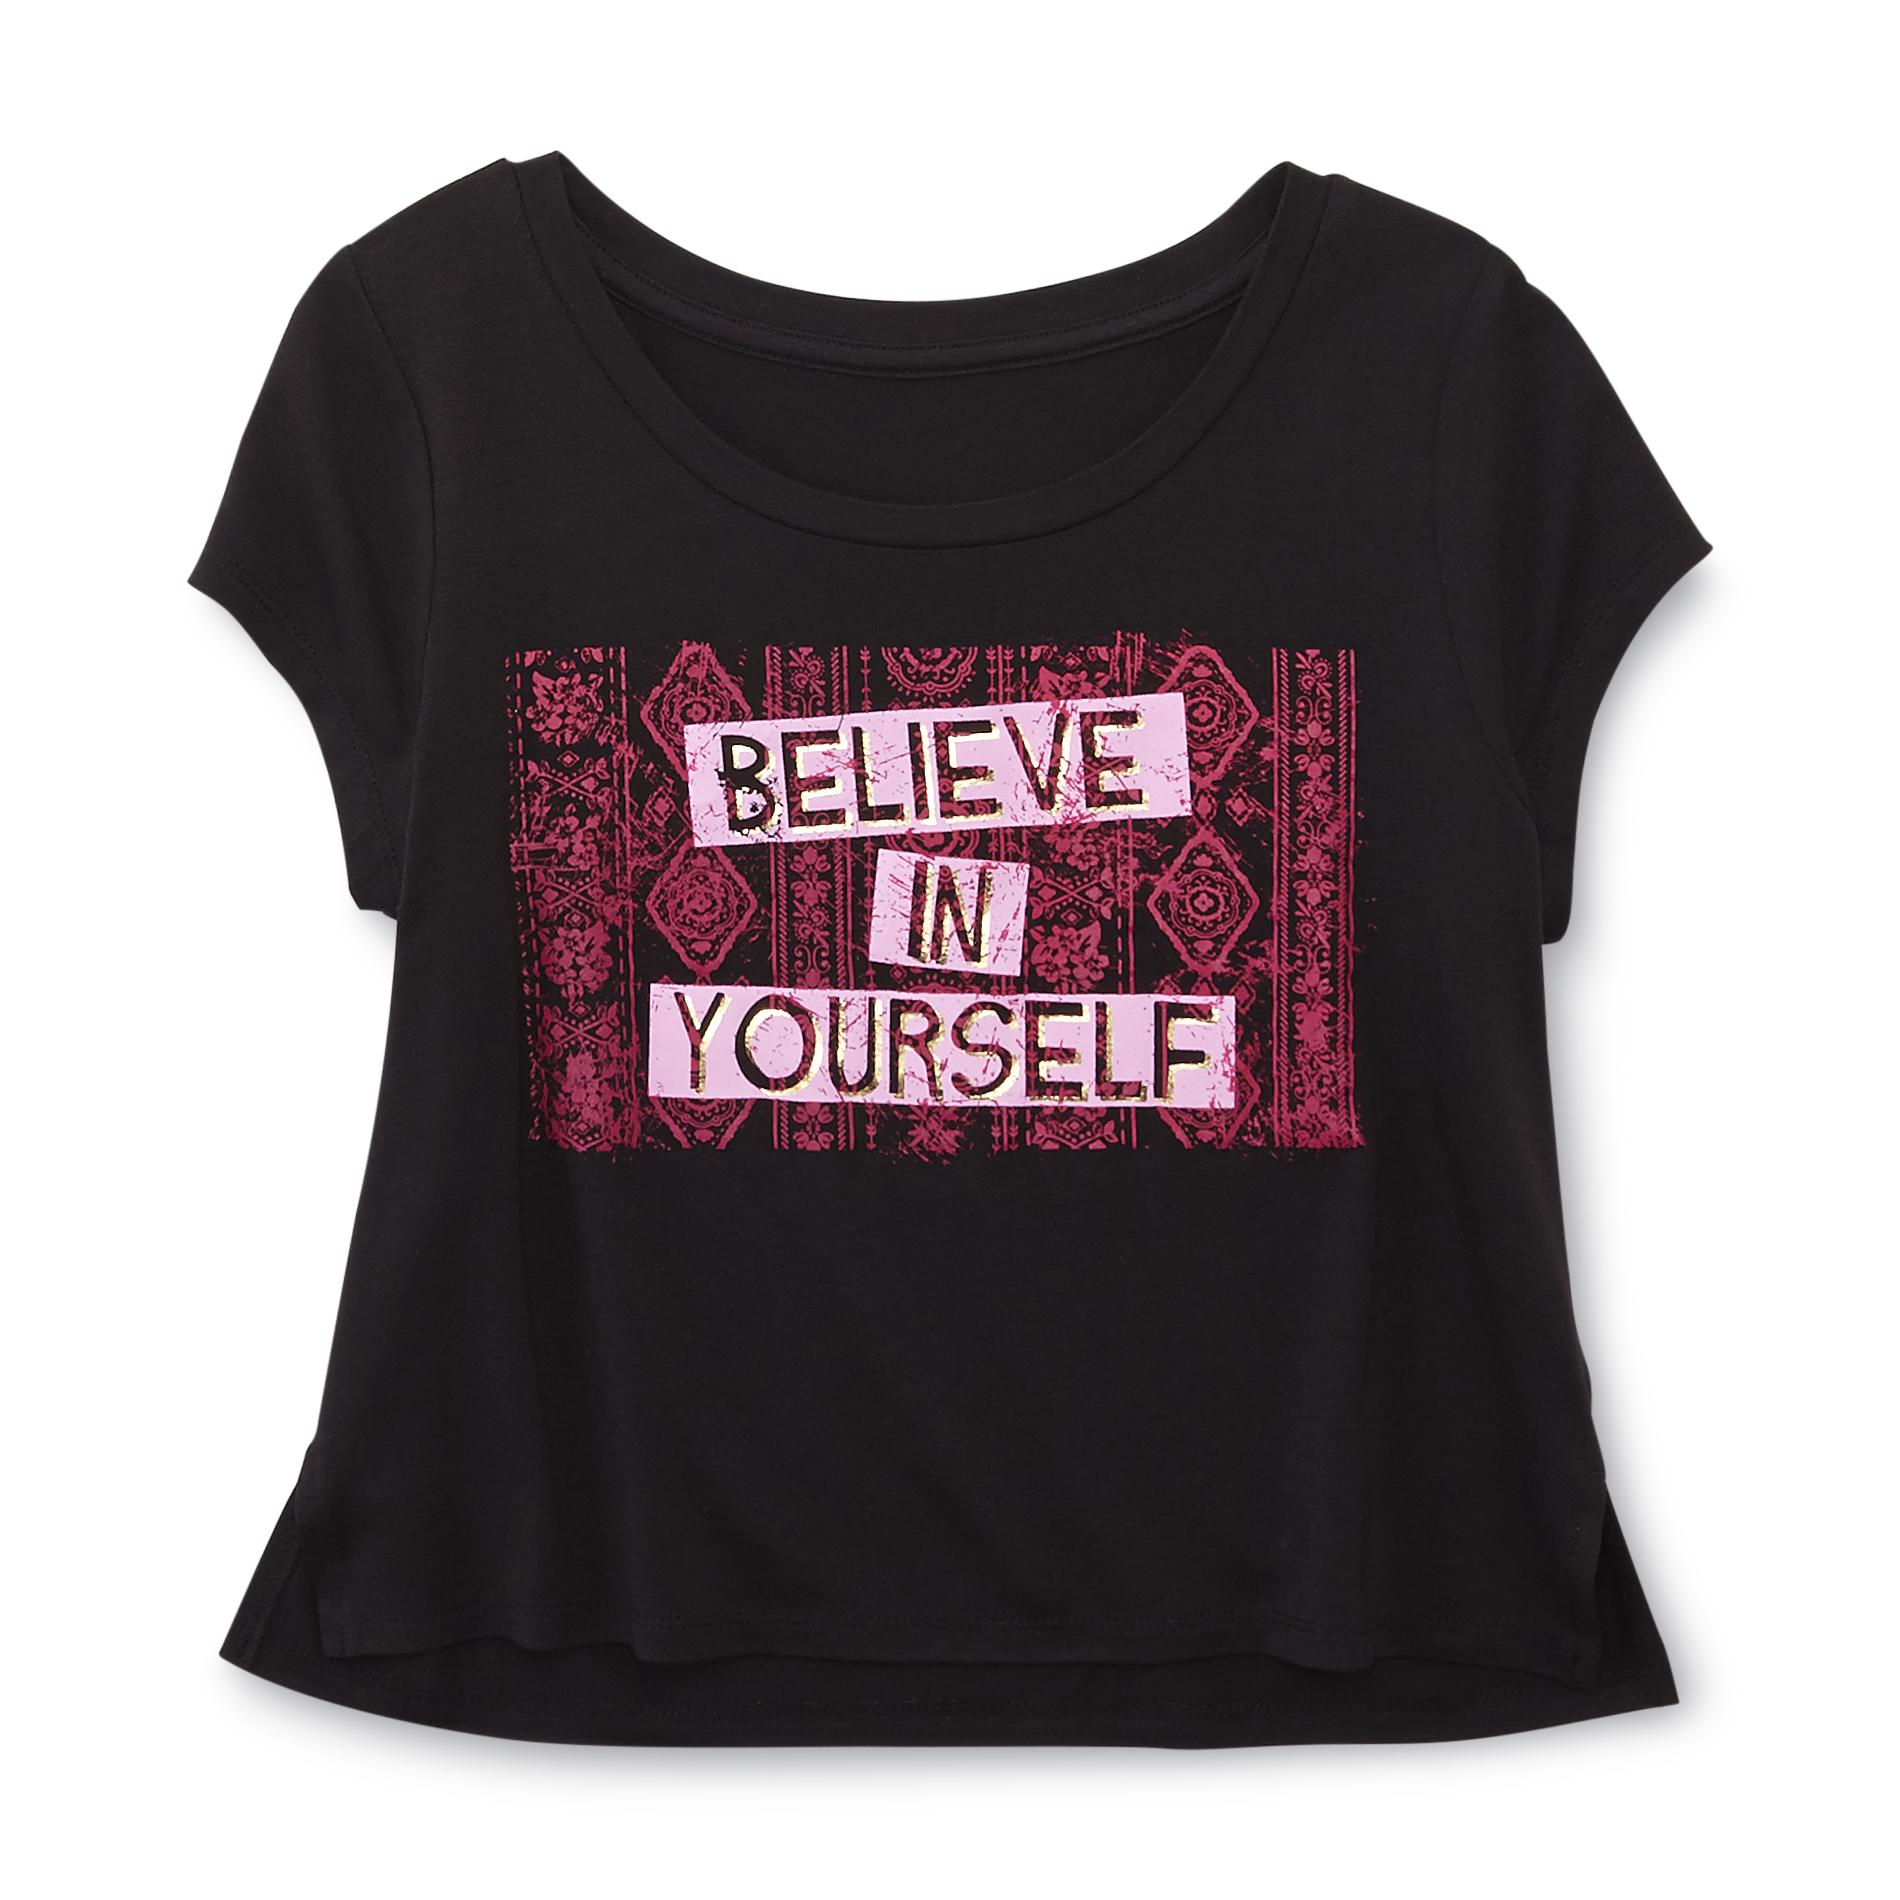 Canyon River Blues Girl's Cropped Graphic T-Shirt - Believe in Yourself